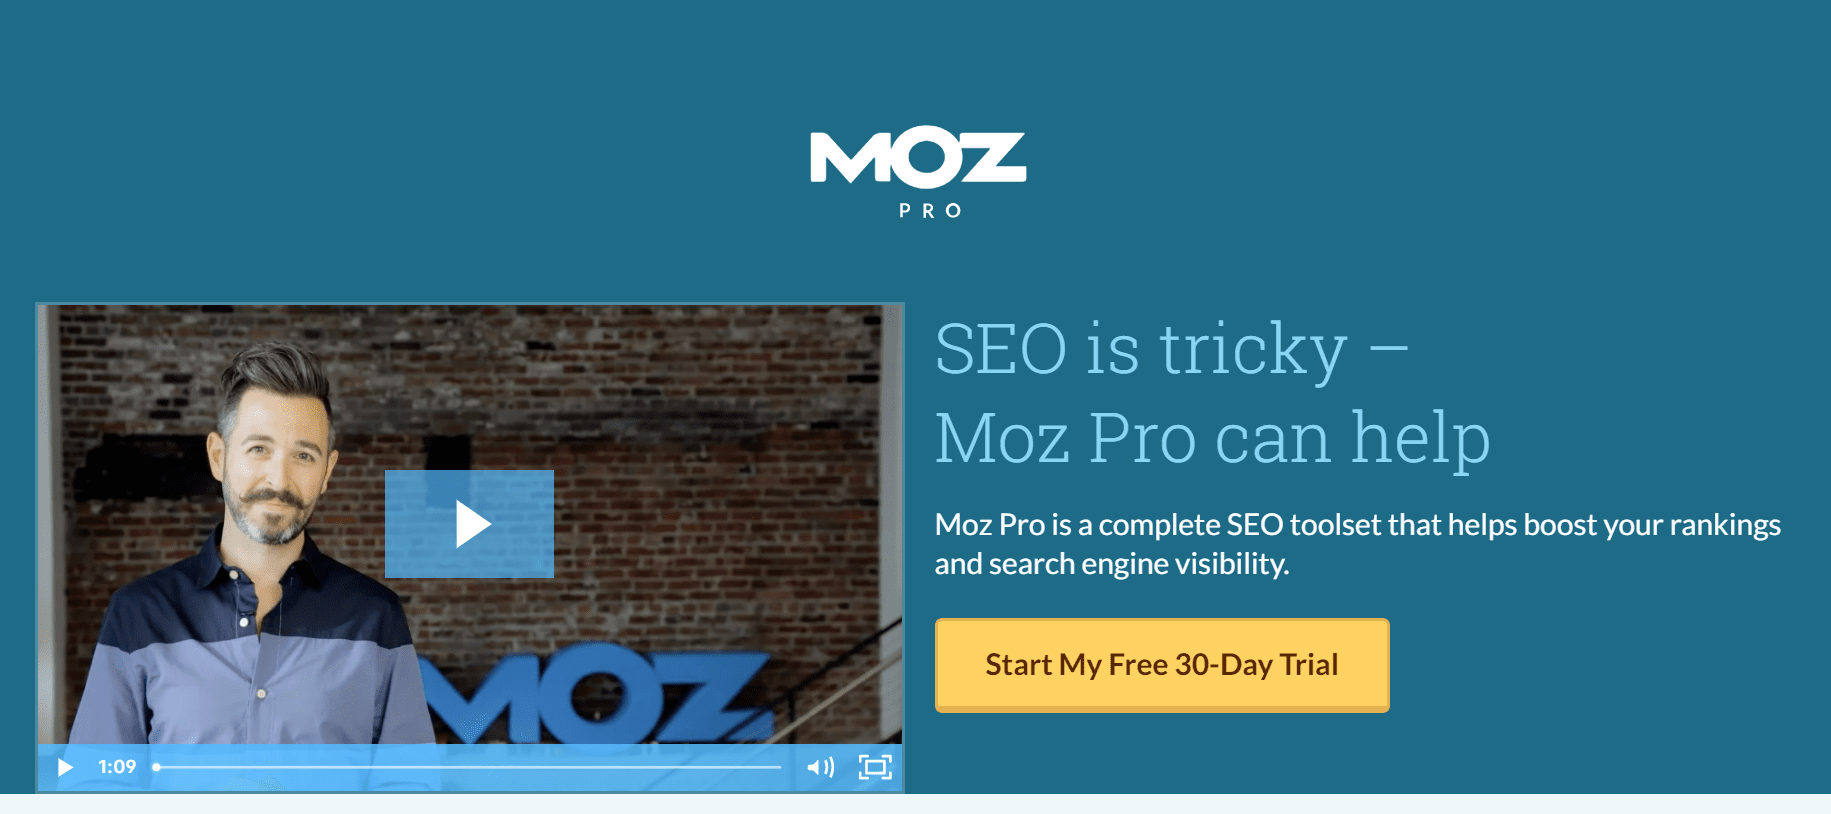 Best SEO Software For Agencies - MOZ